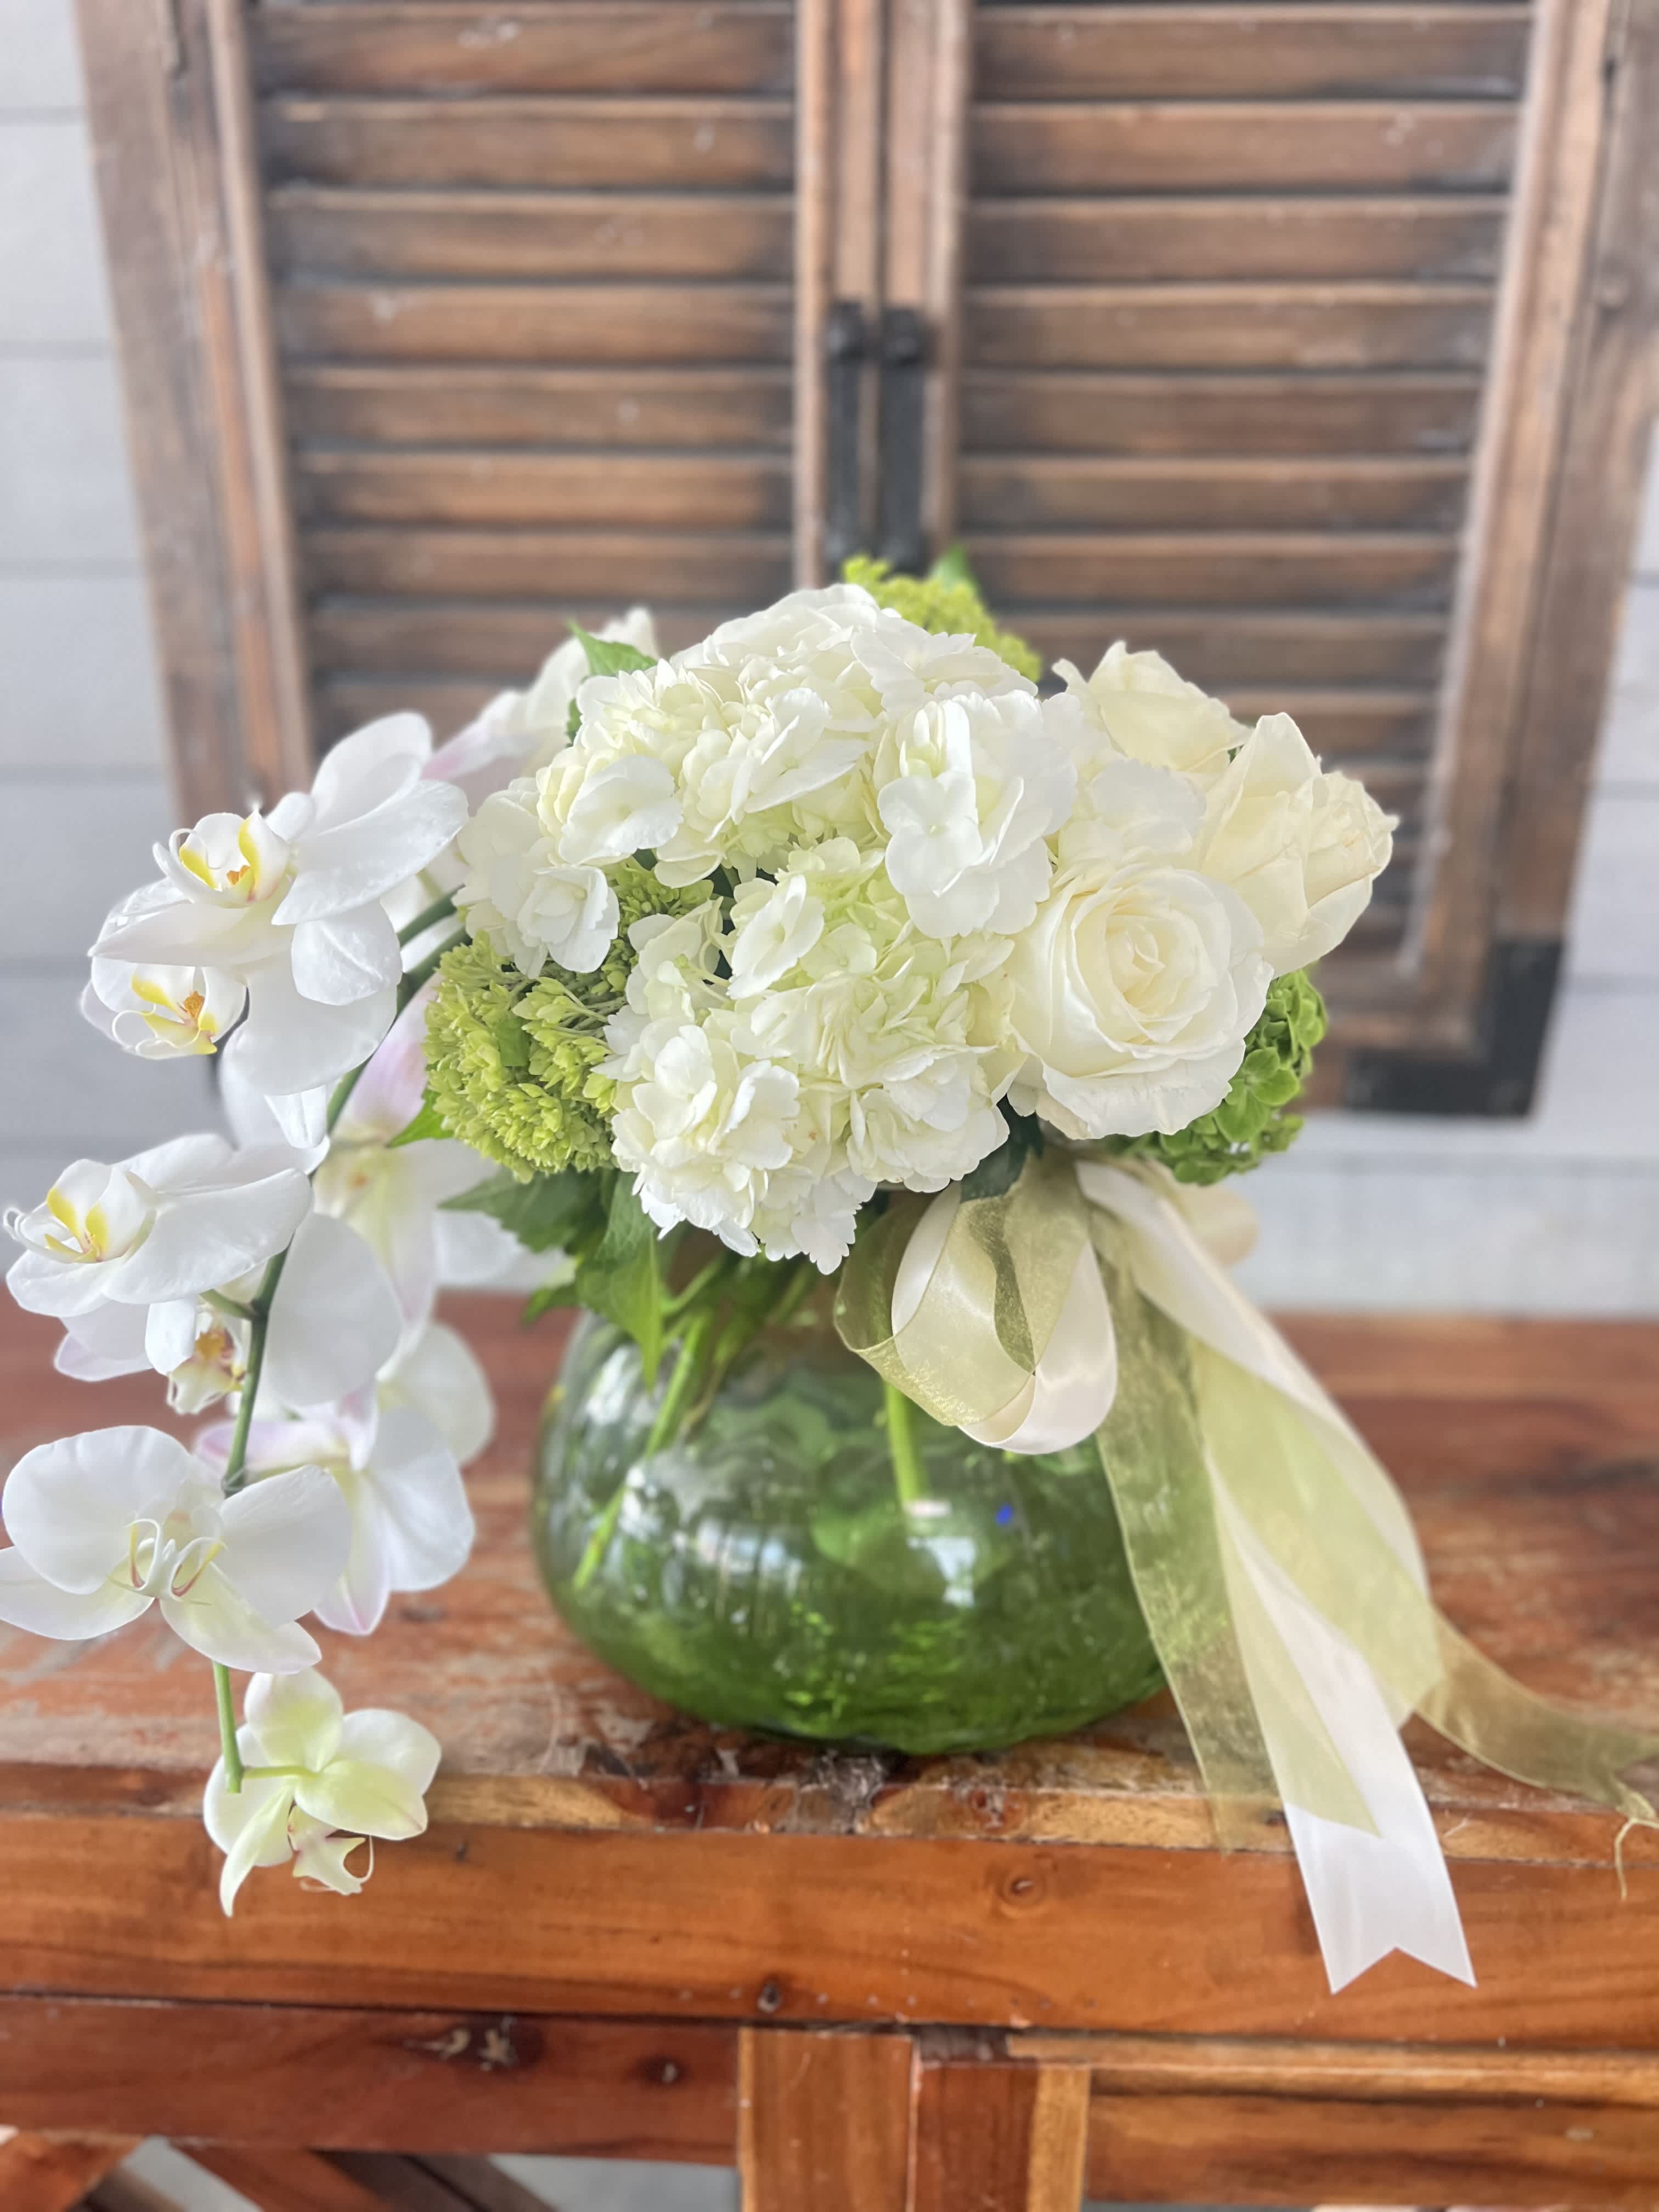 Ireland vibes - White and green Flowers In Premium glass vase 